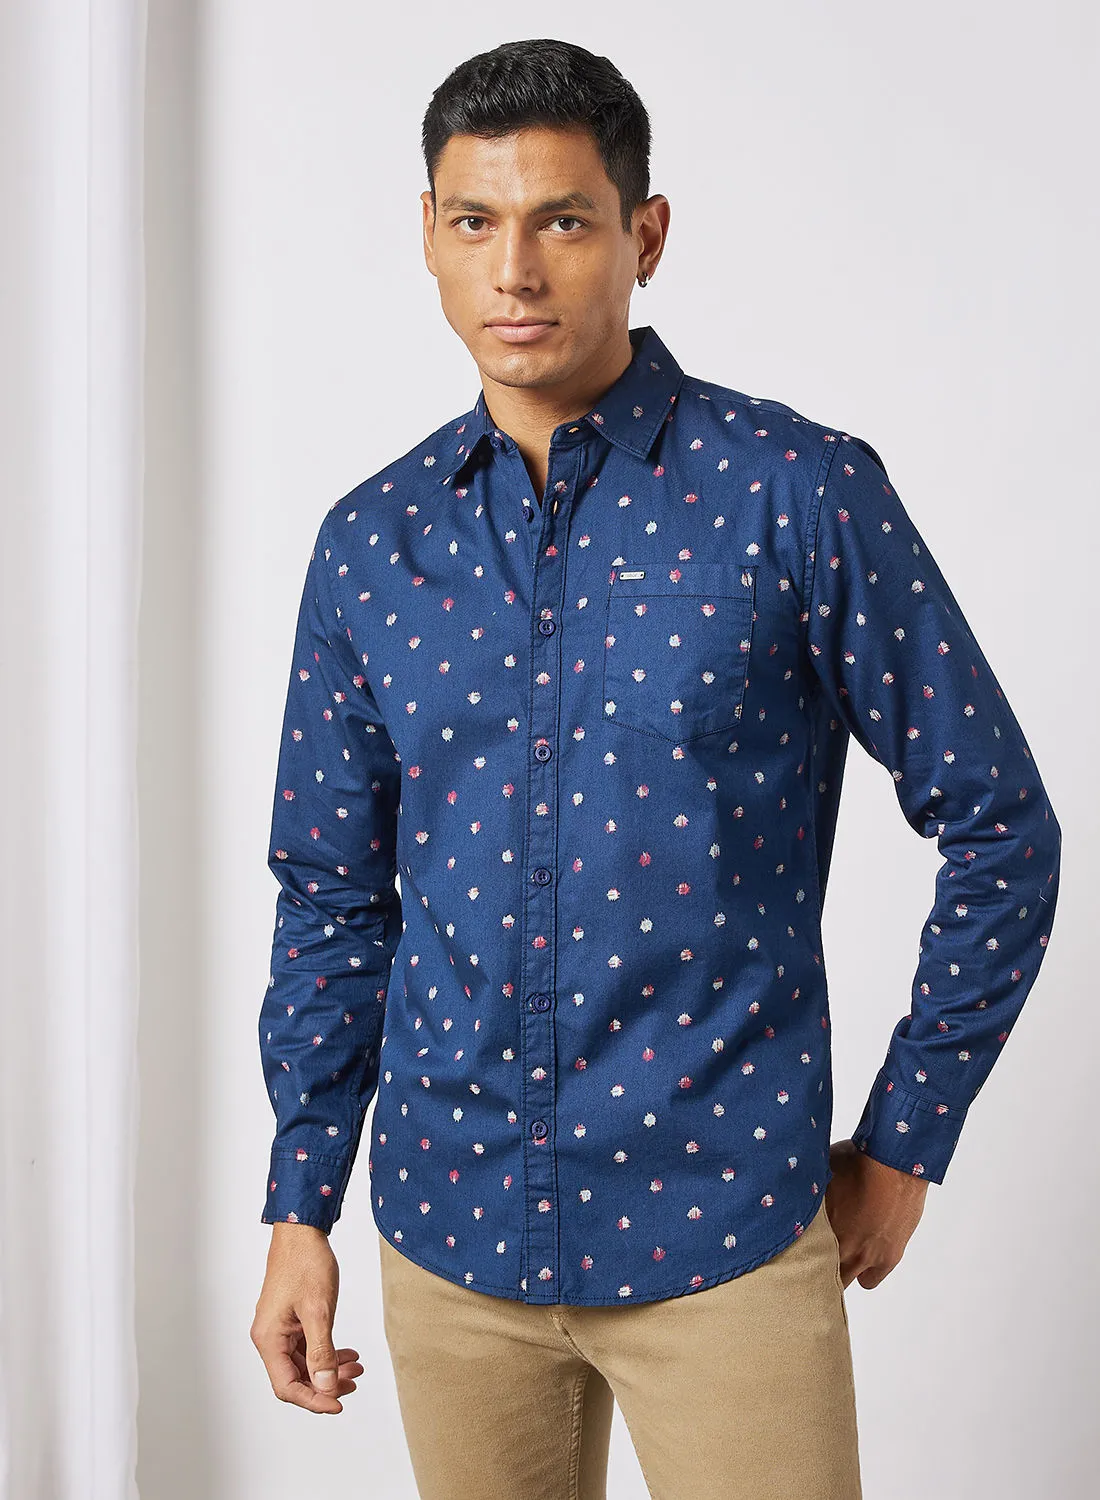 ABOF Casual All Over Printed Regular Fit Shirt Blue